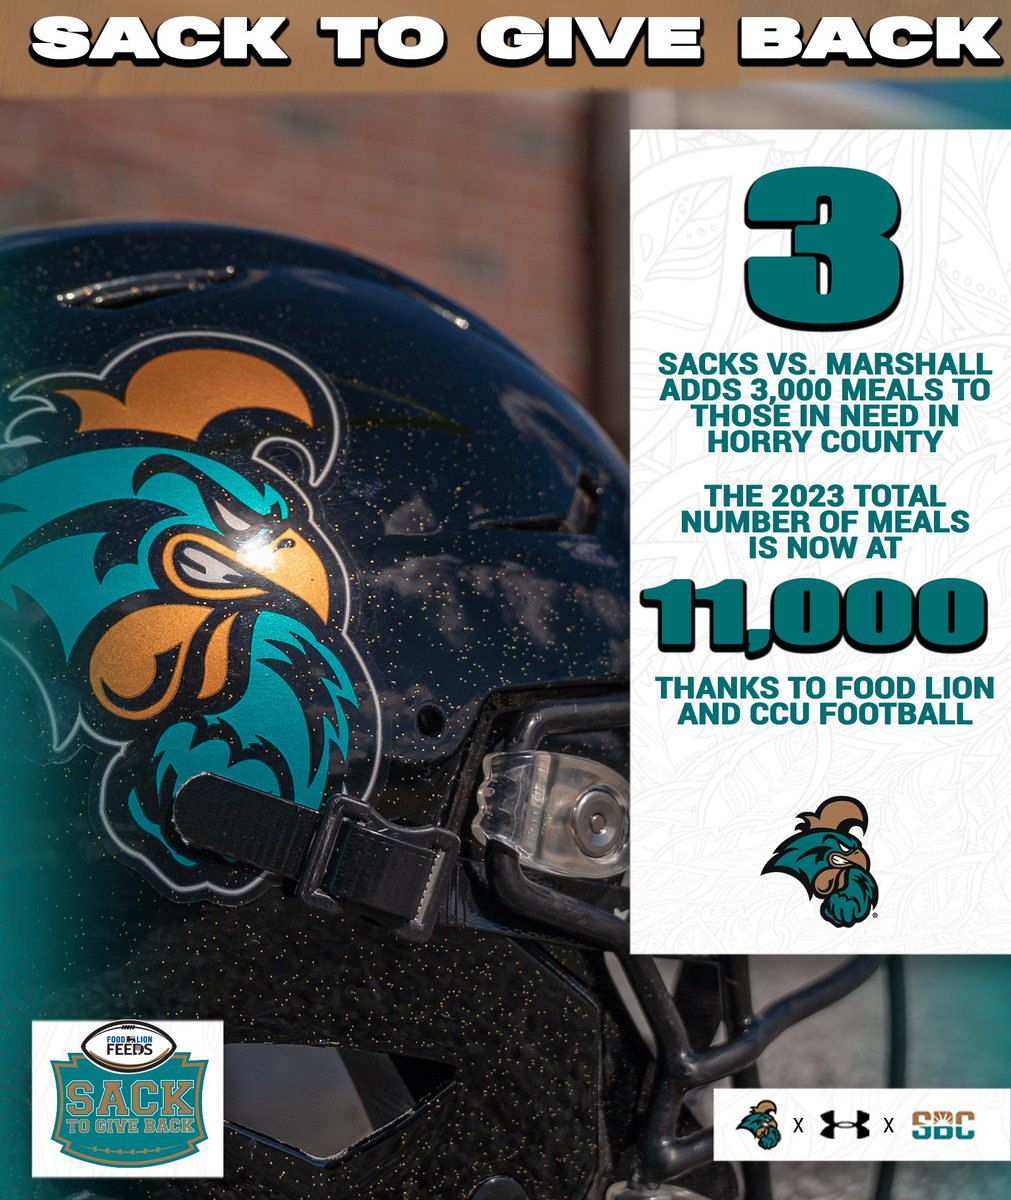 3 sacks by the @CoastalFootball Black Swarm adds 3,000 meals for those in need in Horry County thanks to @FoodLion!